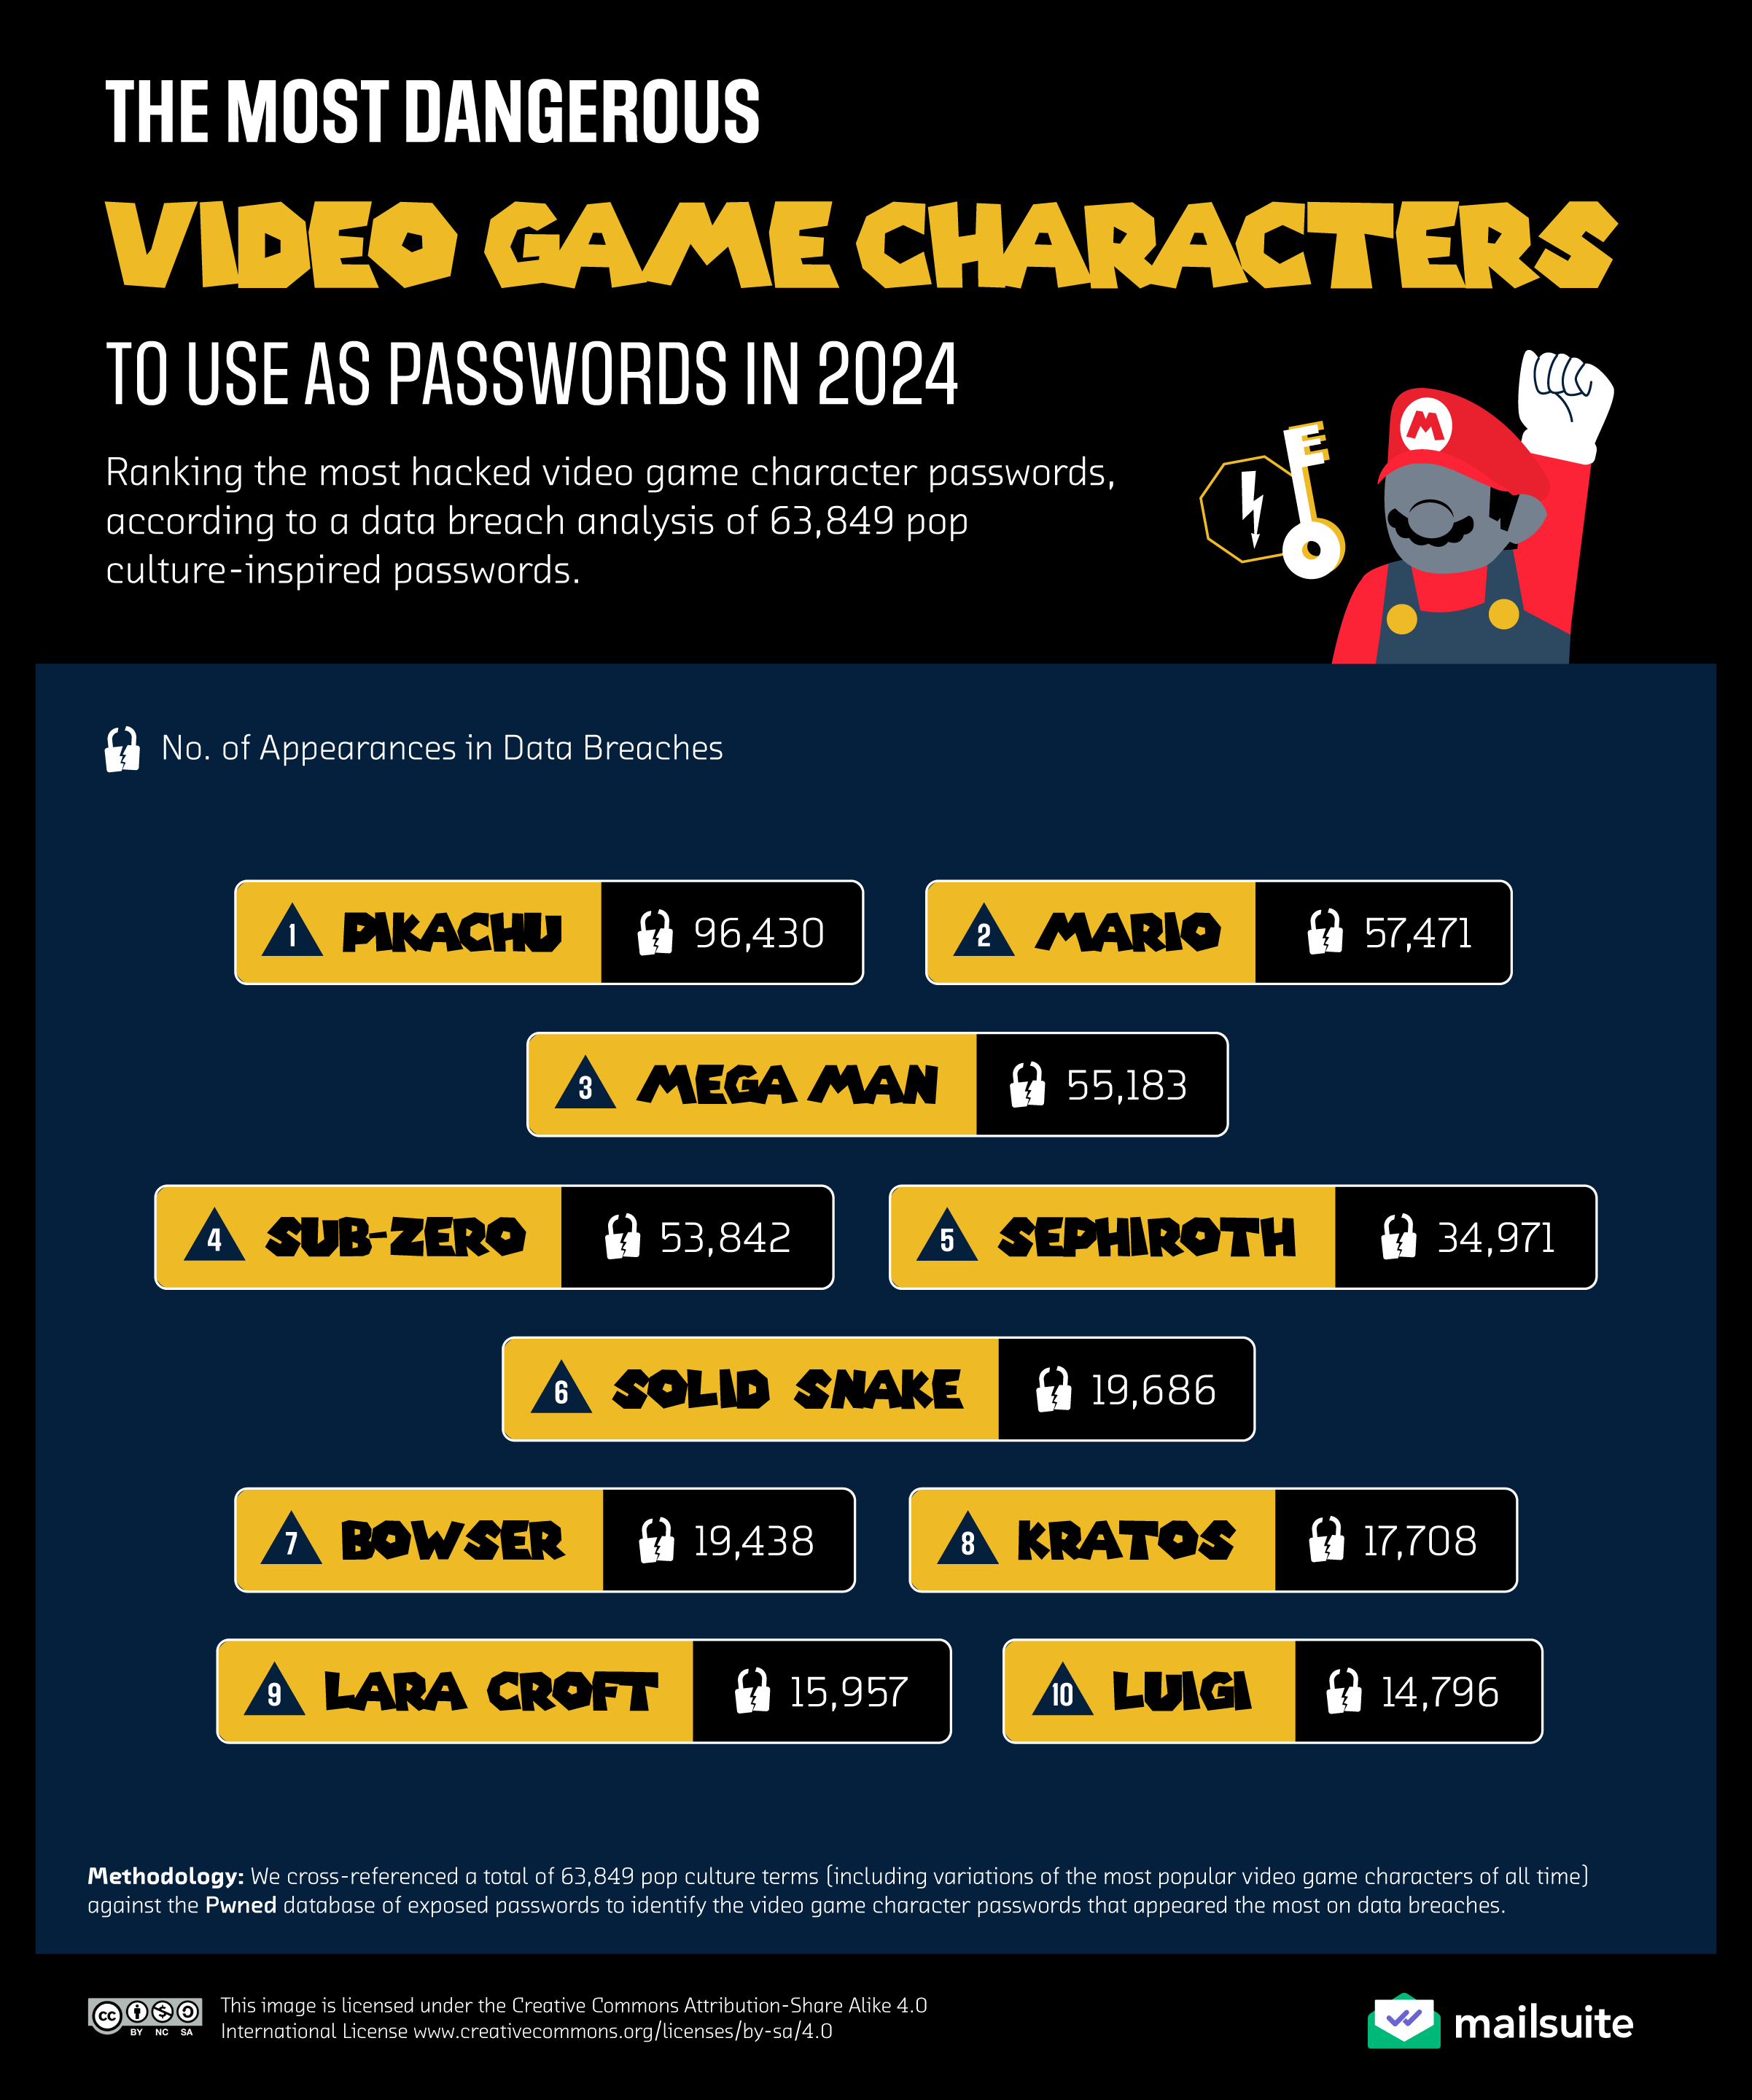 The Most Dangerous Video Game Characters to Use As Passwords in 2024